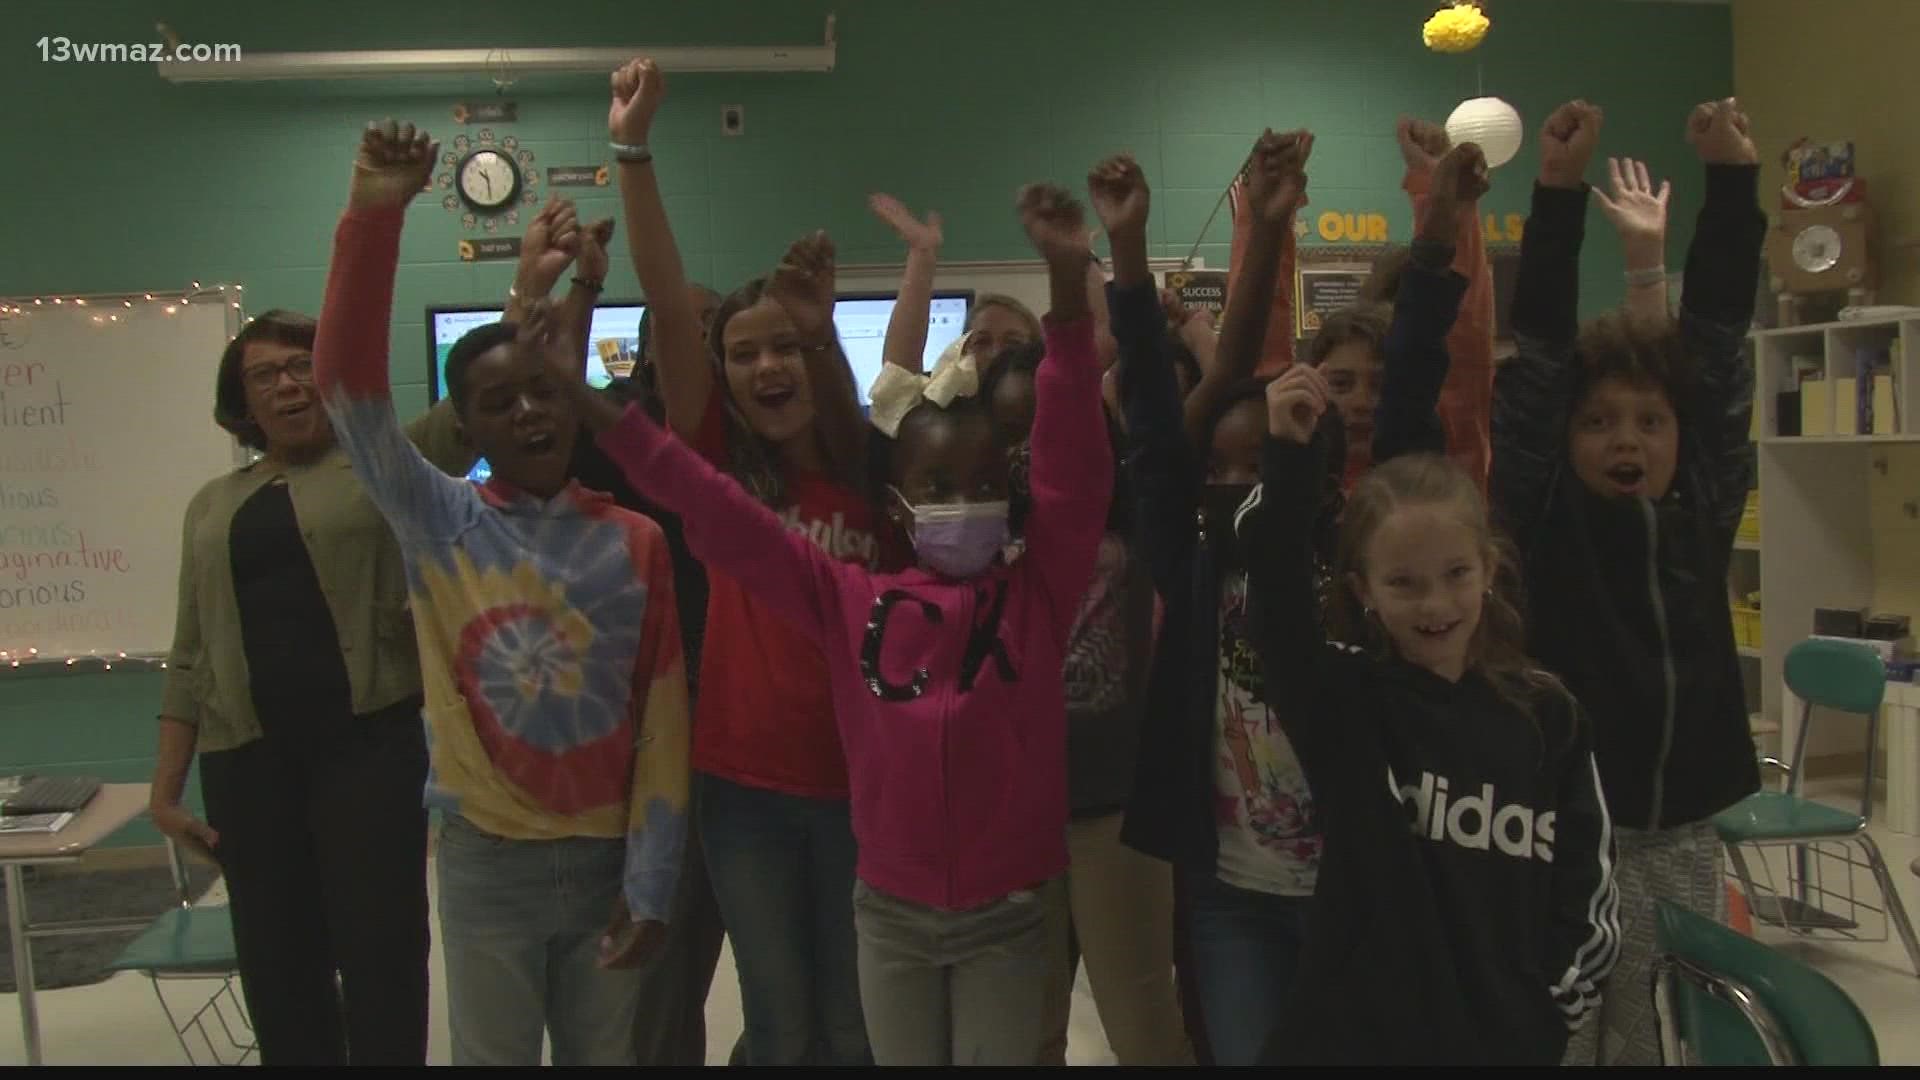 The gifted program at hunt elementary school in peach county aims for students to develop their critical thinking and creativity skills.